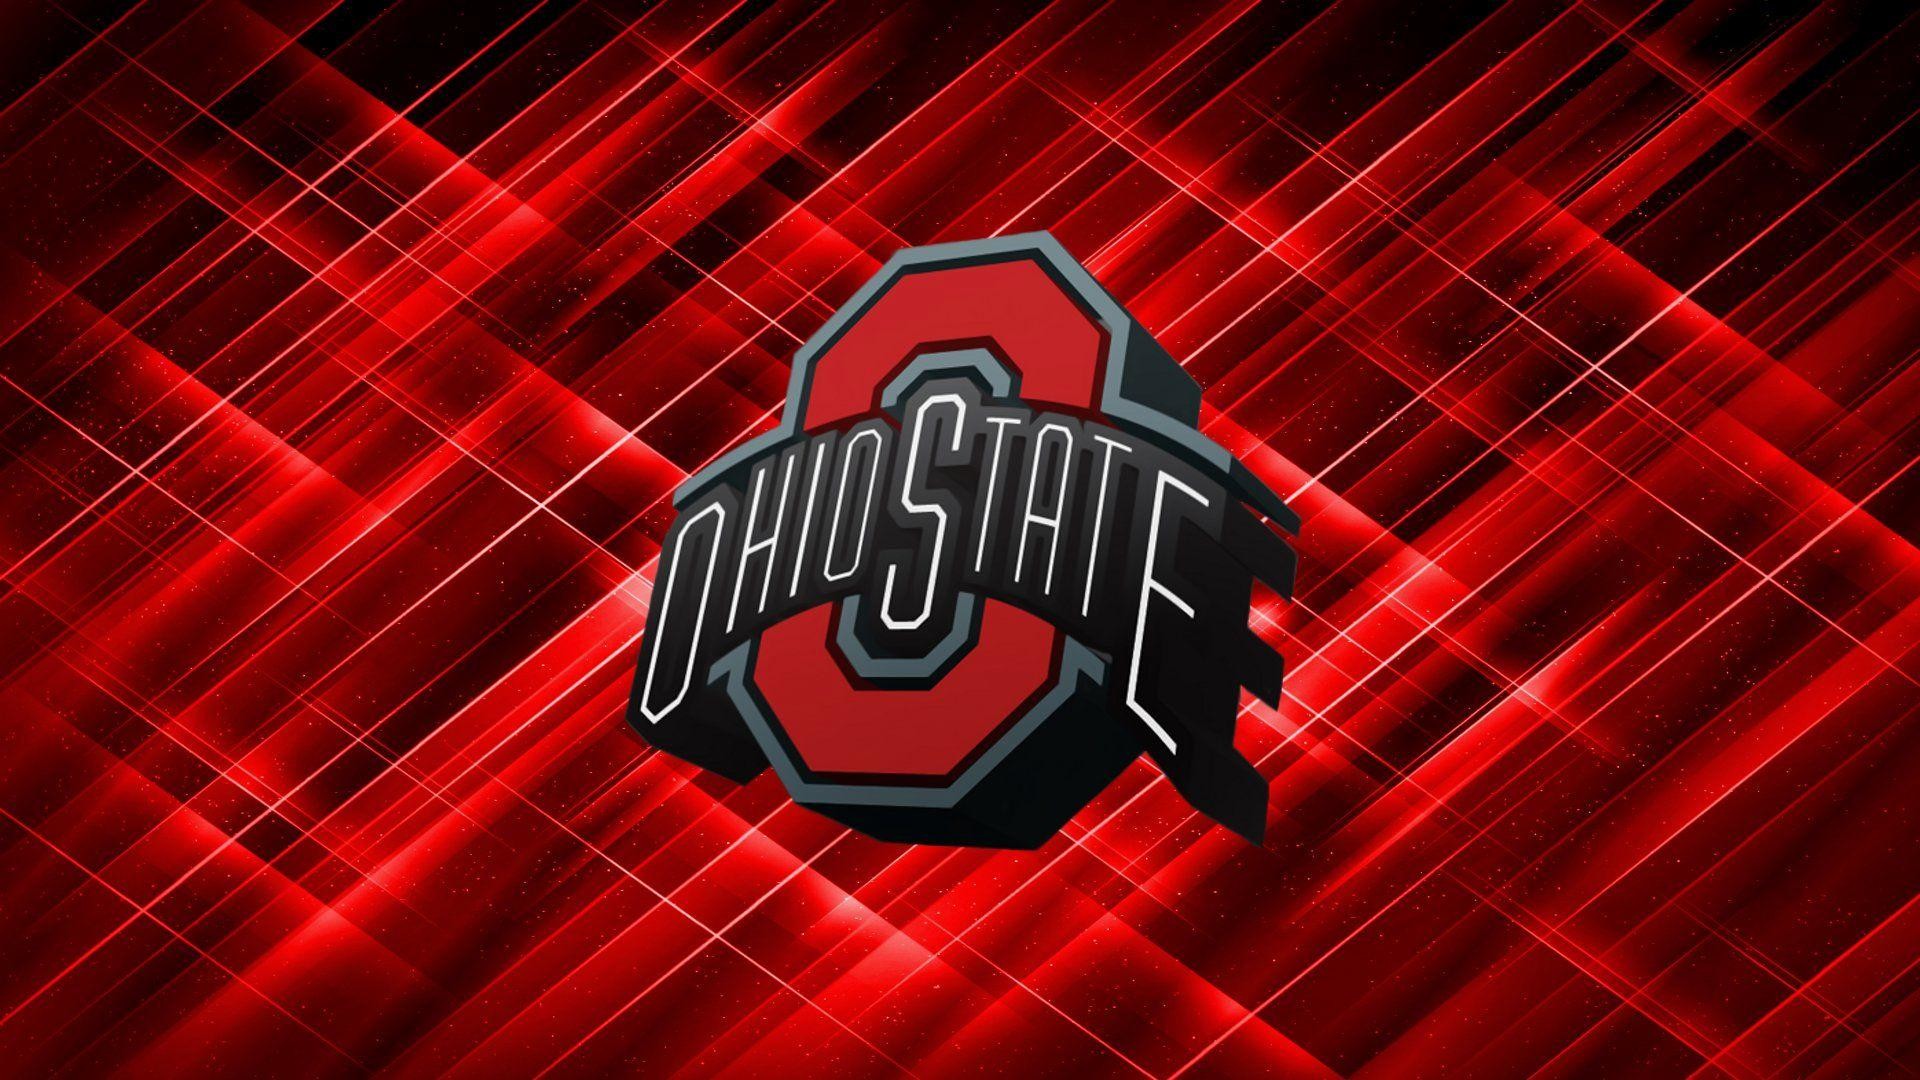 1920x1080 Ohio-State-Buckeyes-Football-Backgrounds-Download-wallpaper-wp40010412